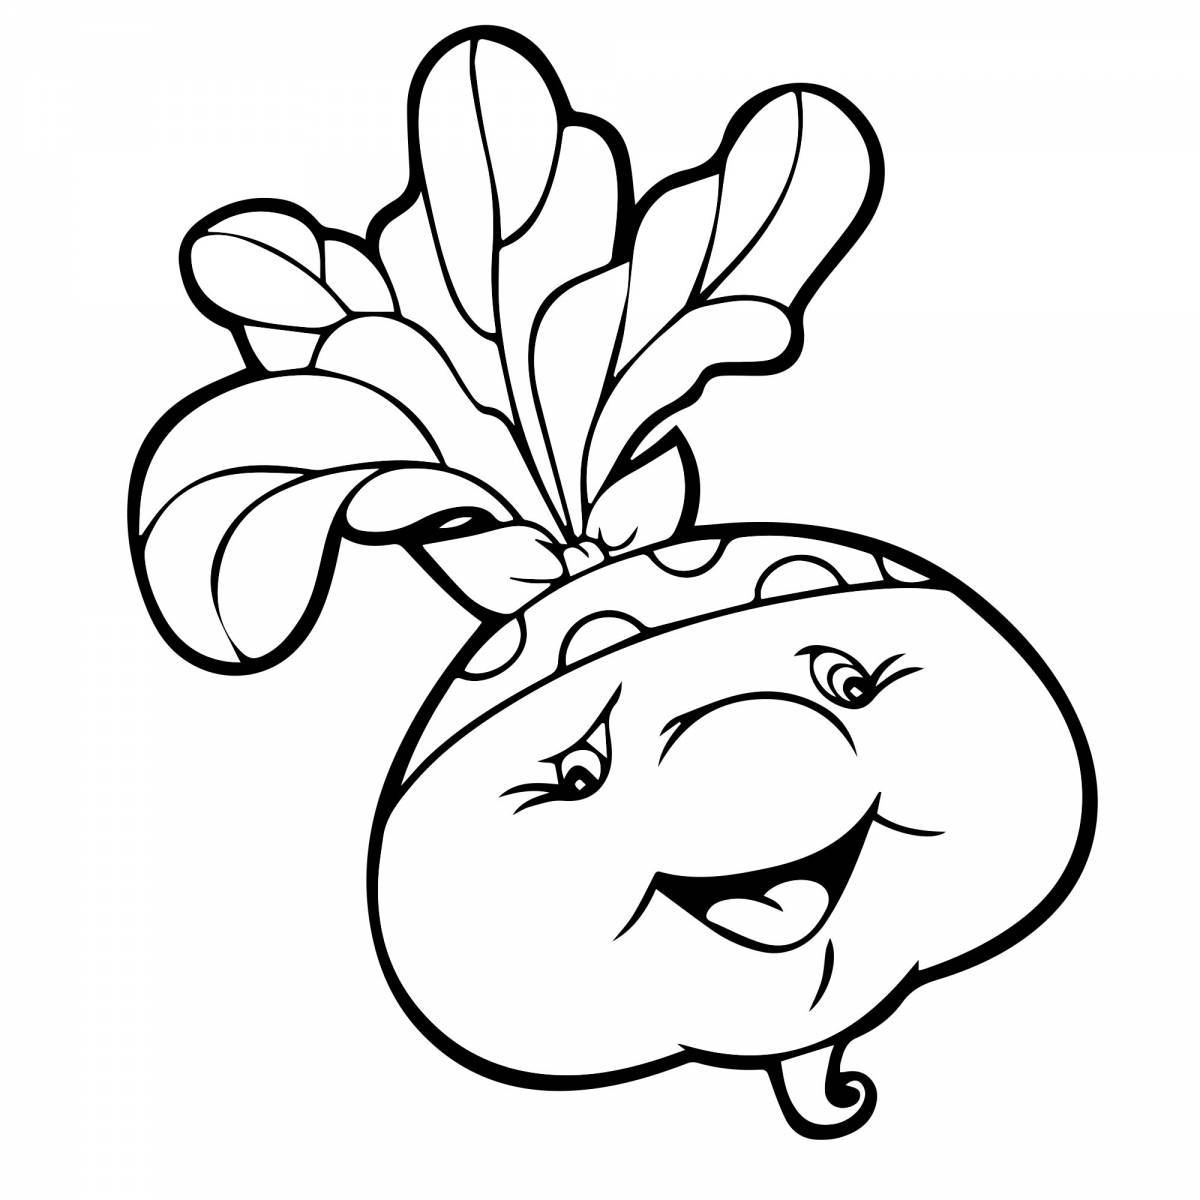 Glitter turnip coloring page